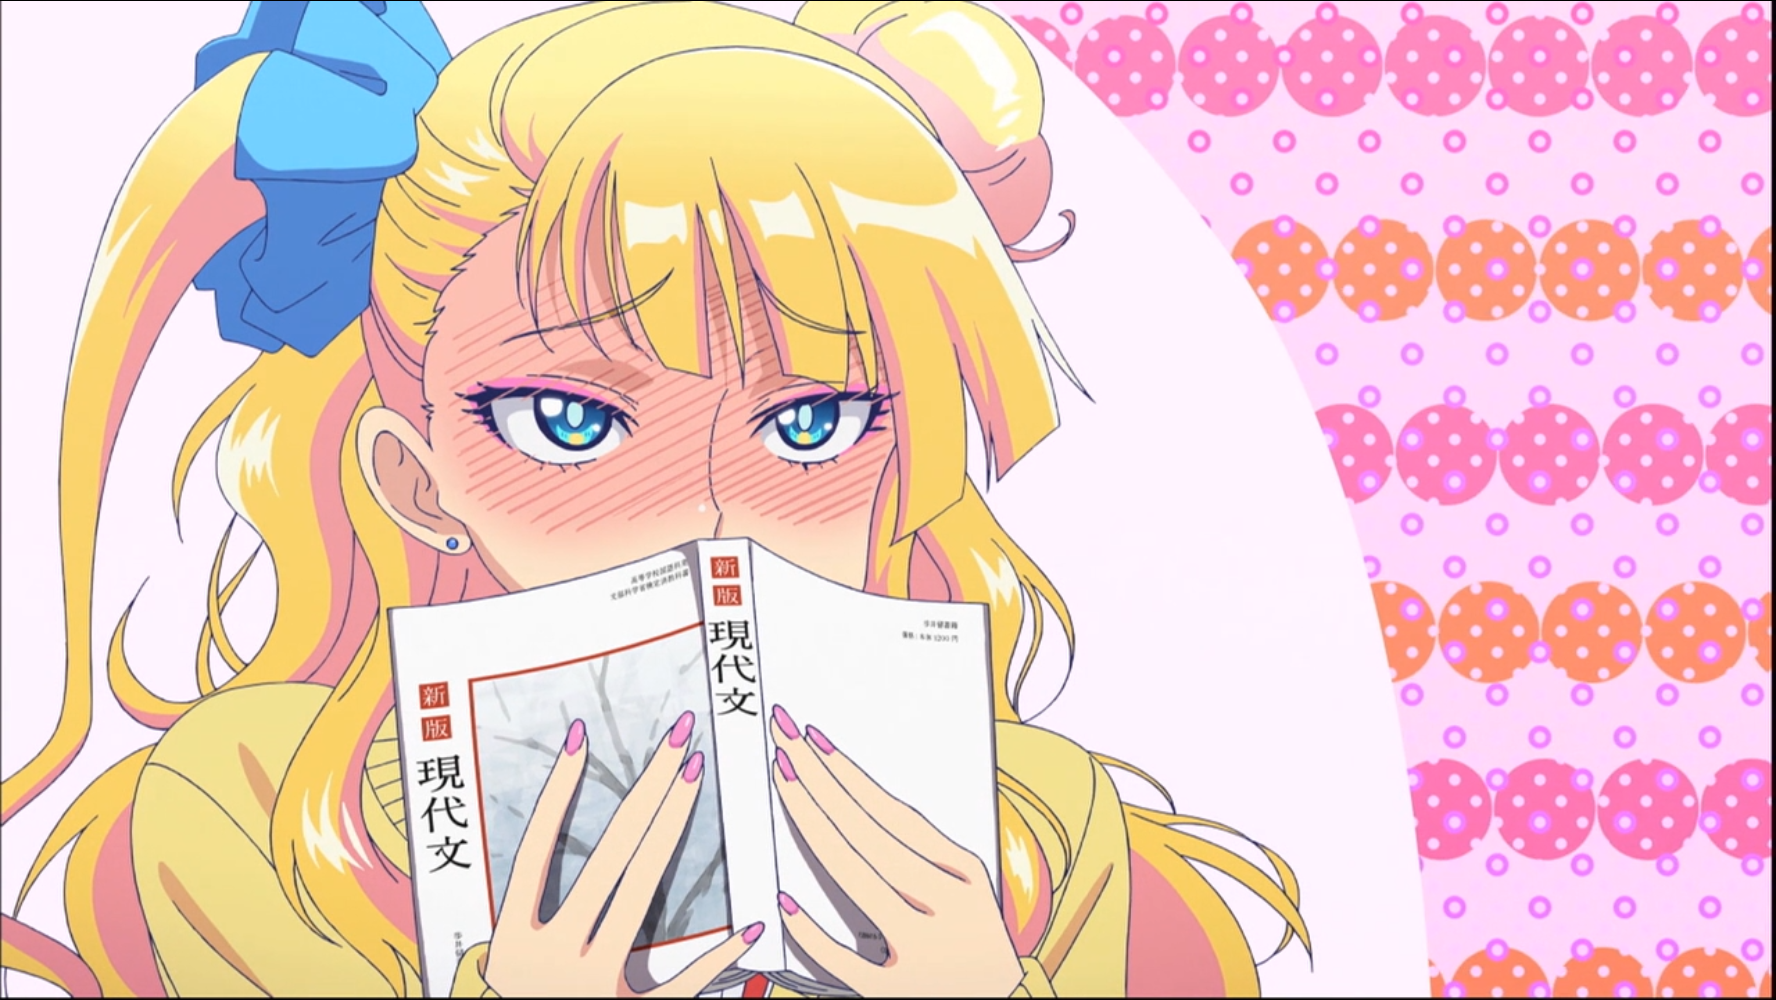 Galko is embarrassed by a romantic scene while reading aloud in Modern Japanese Literature class in a scene from the 2016 Please tell me! Galko-chan TV anime.